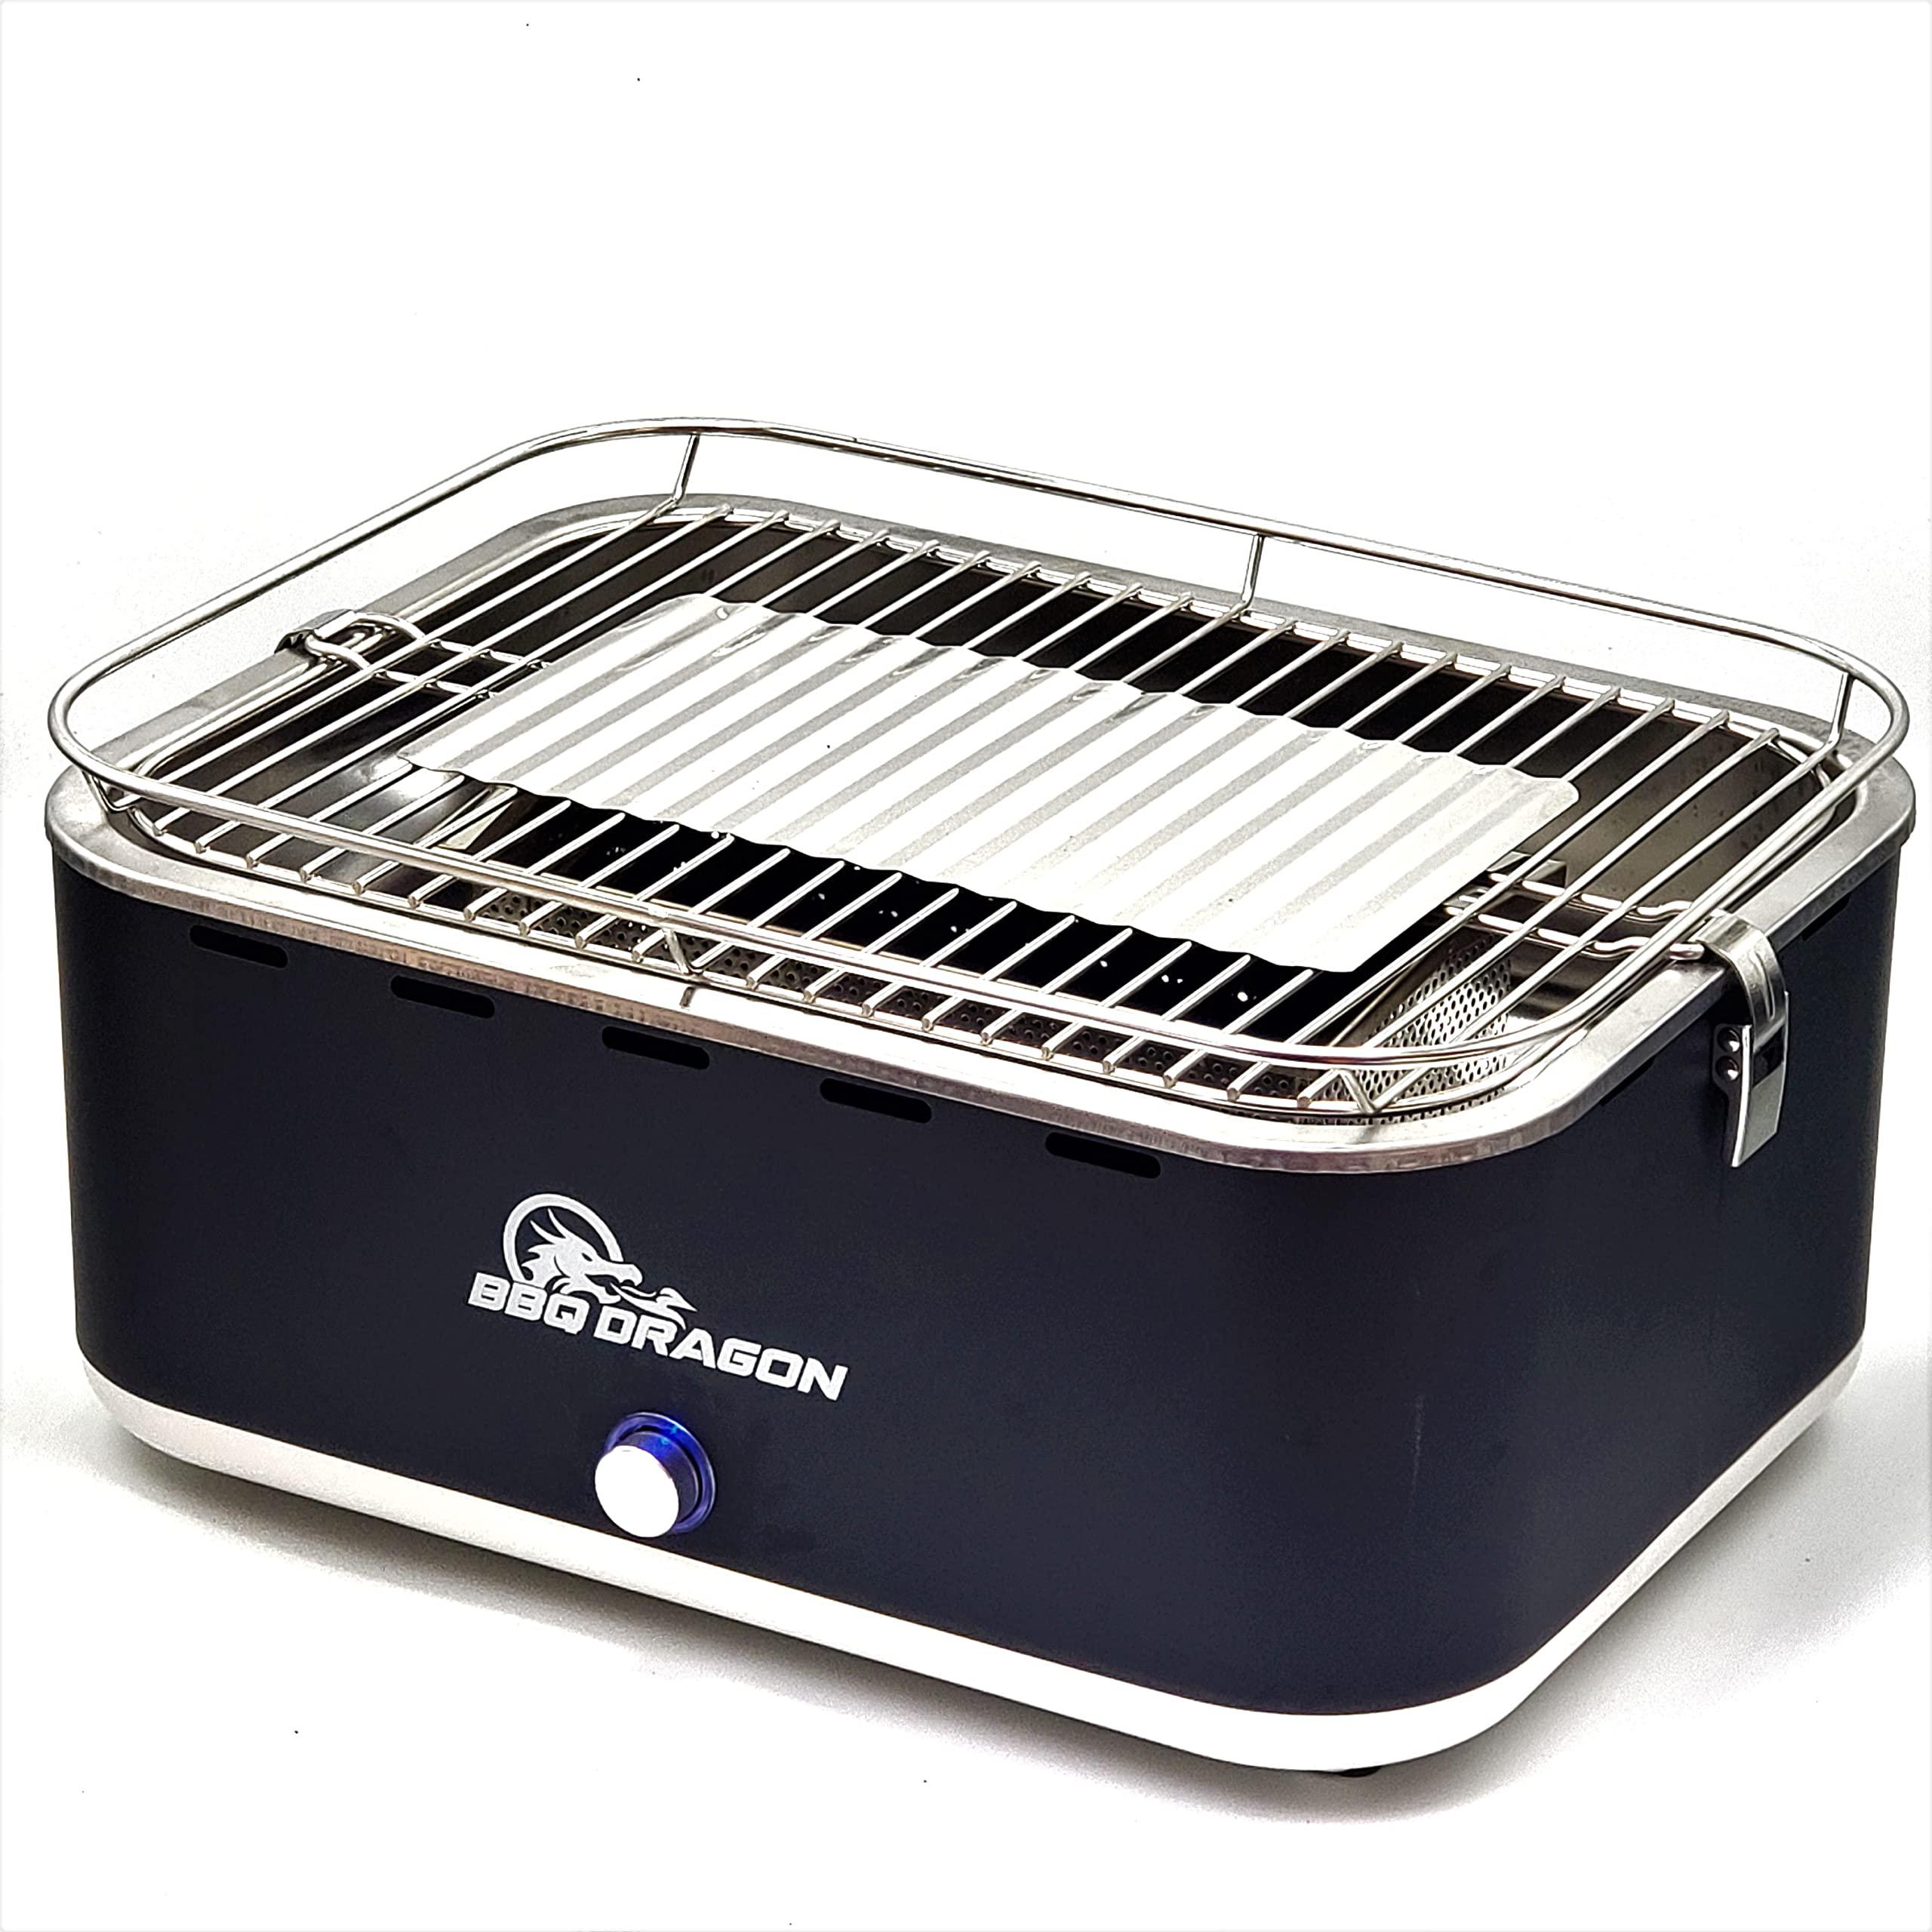 bbq dragon zephyr portable grill - bbq grill with built-in adjustable speed fan - table top mini grill with stainless steel i